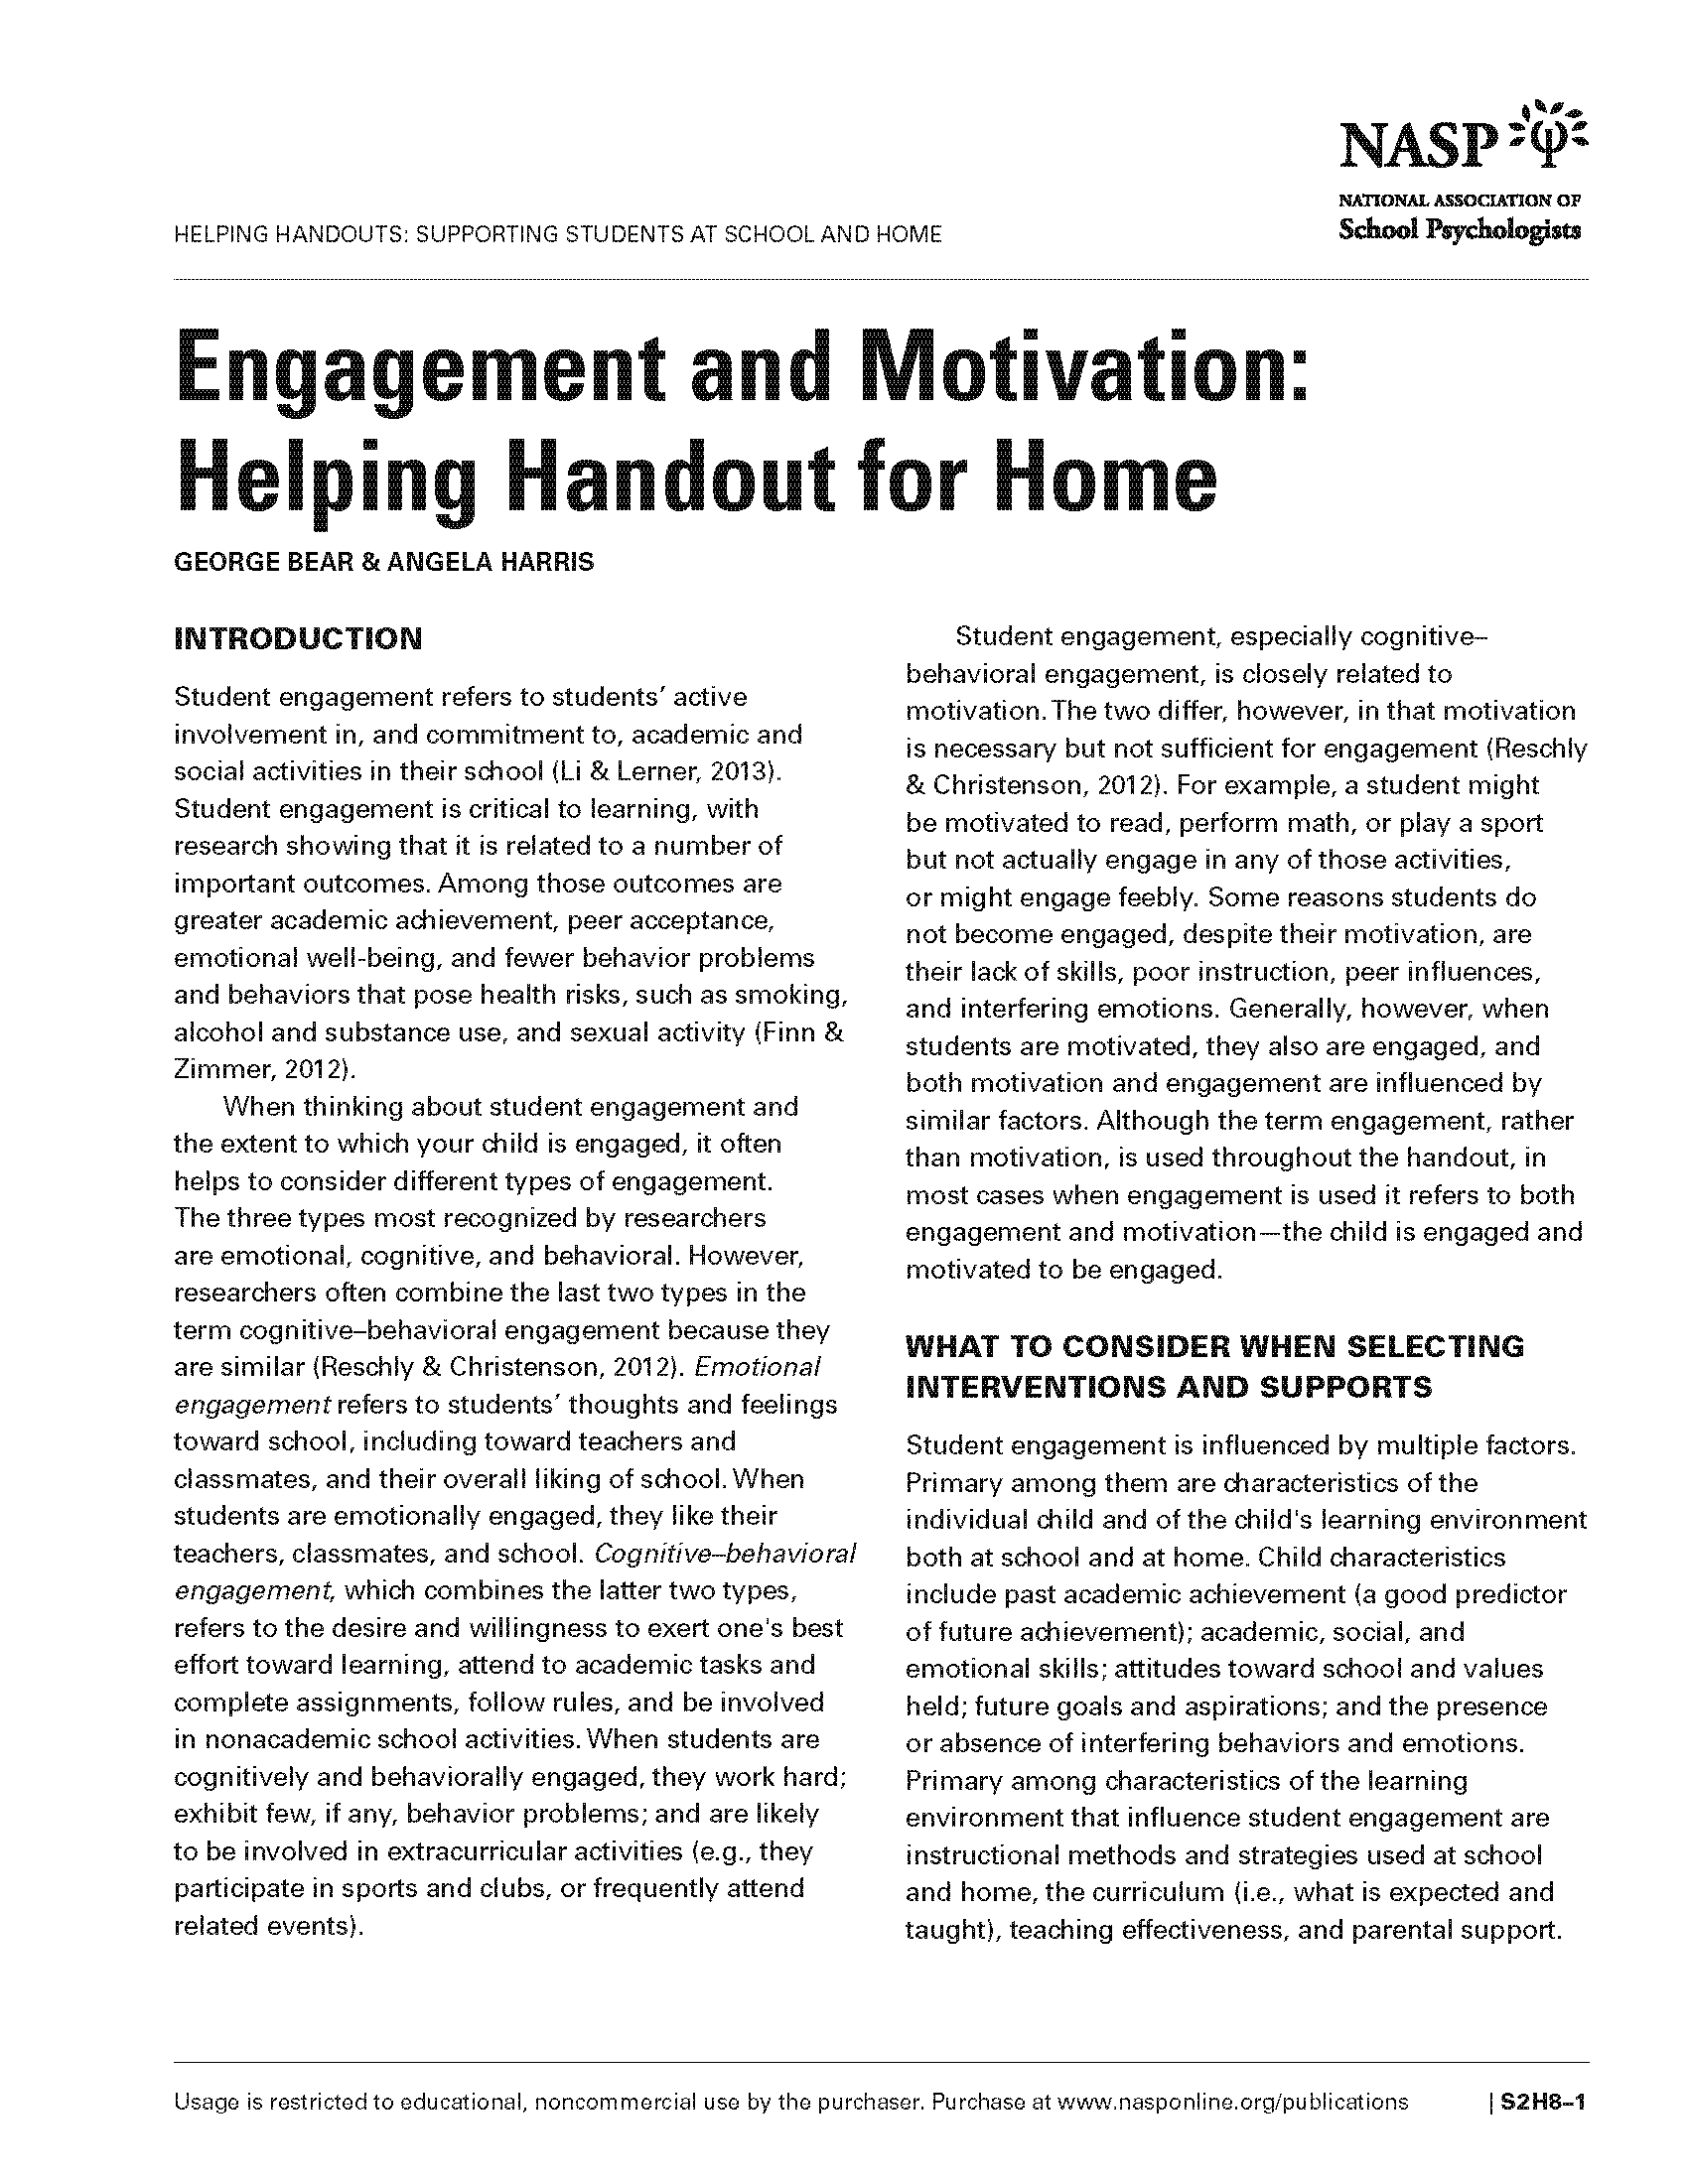 Engagement and Motivation: Helping Handout for Home